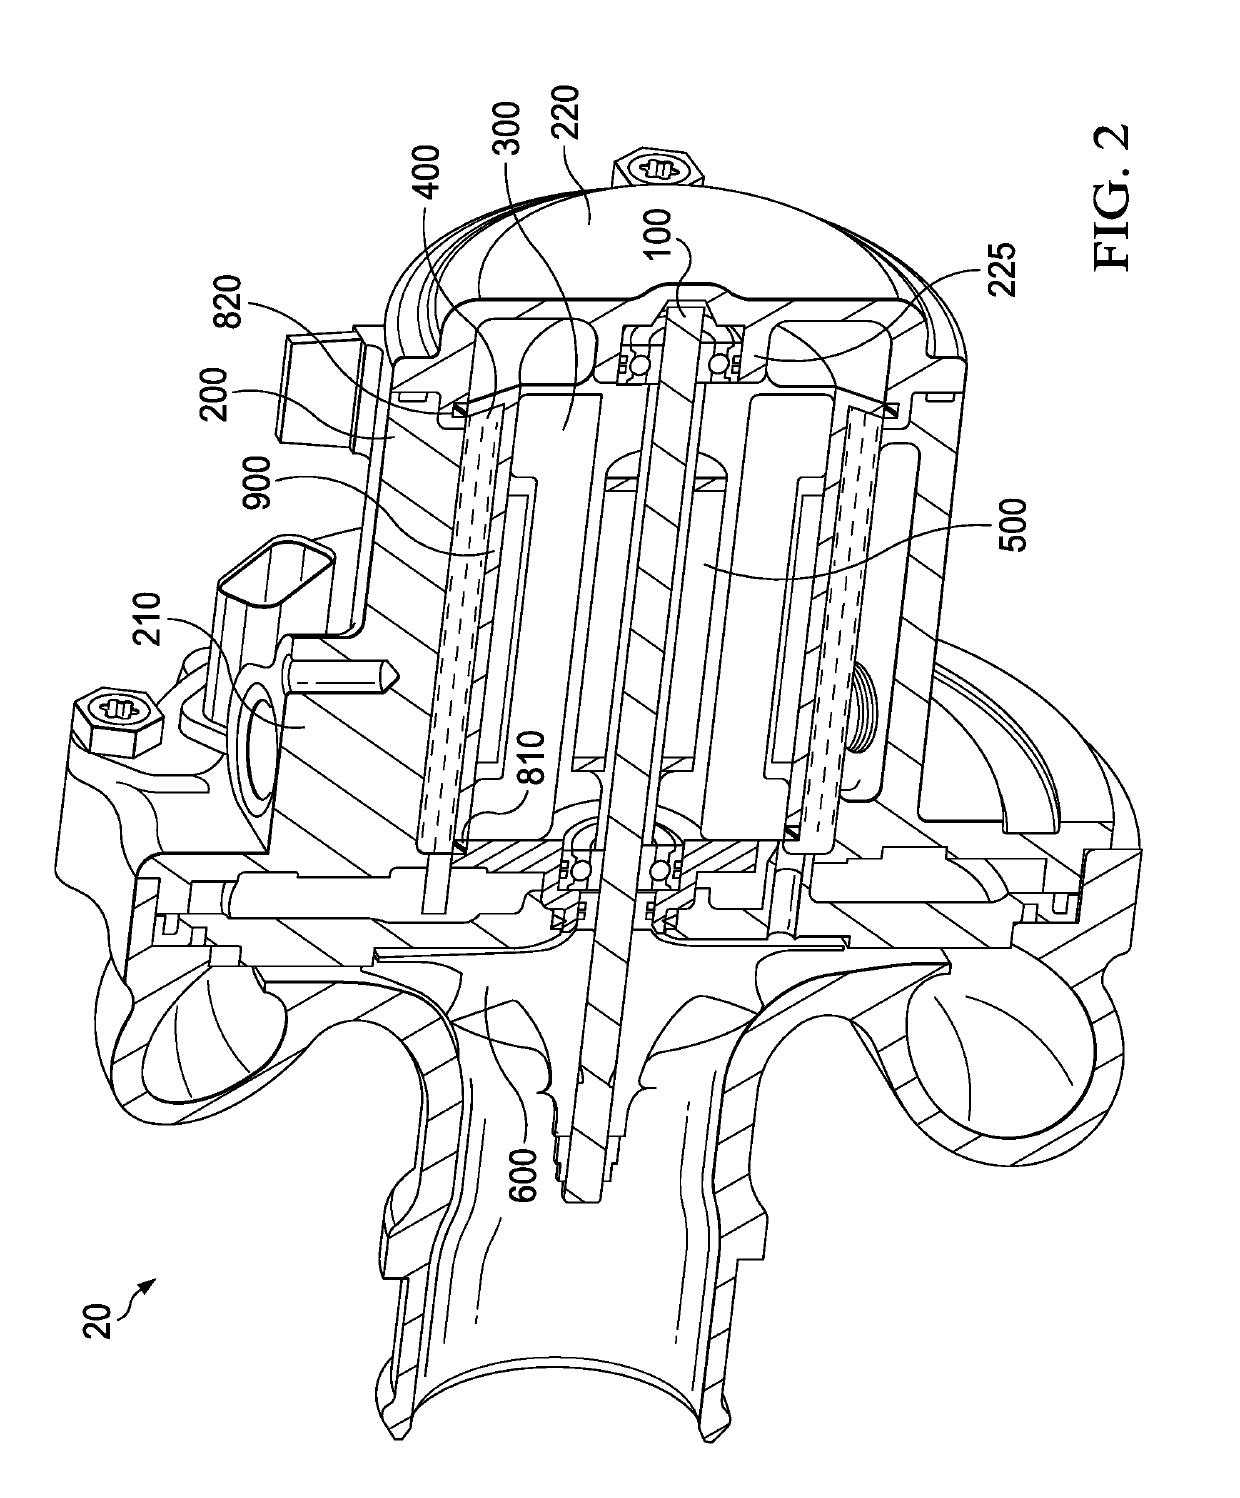 Electric charging device with fluid cooling